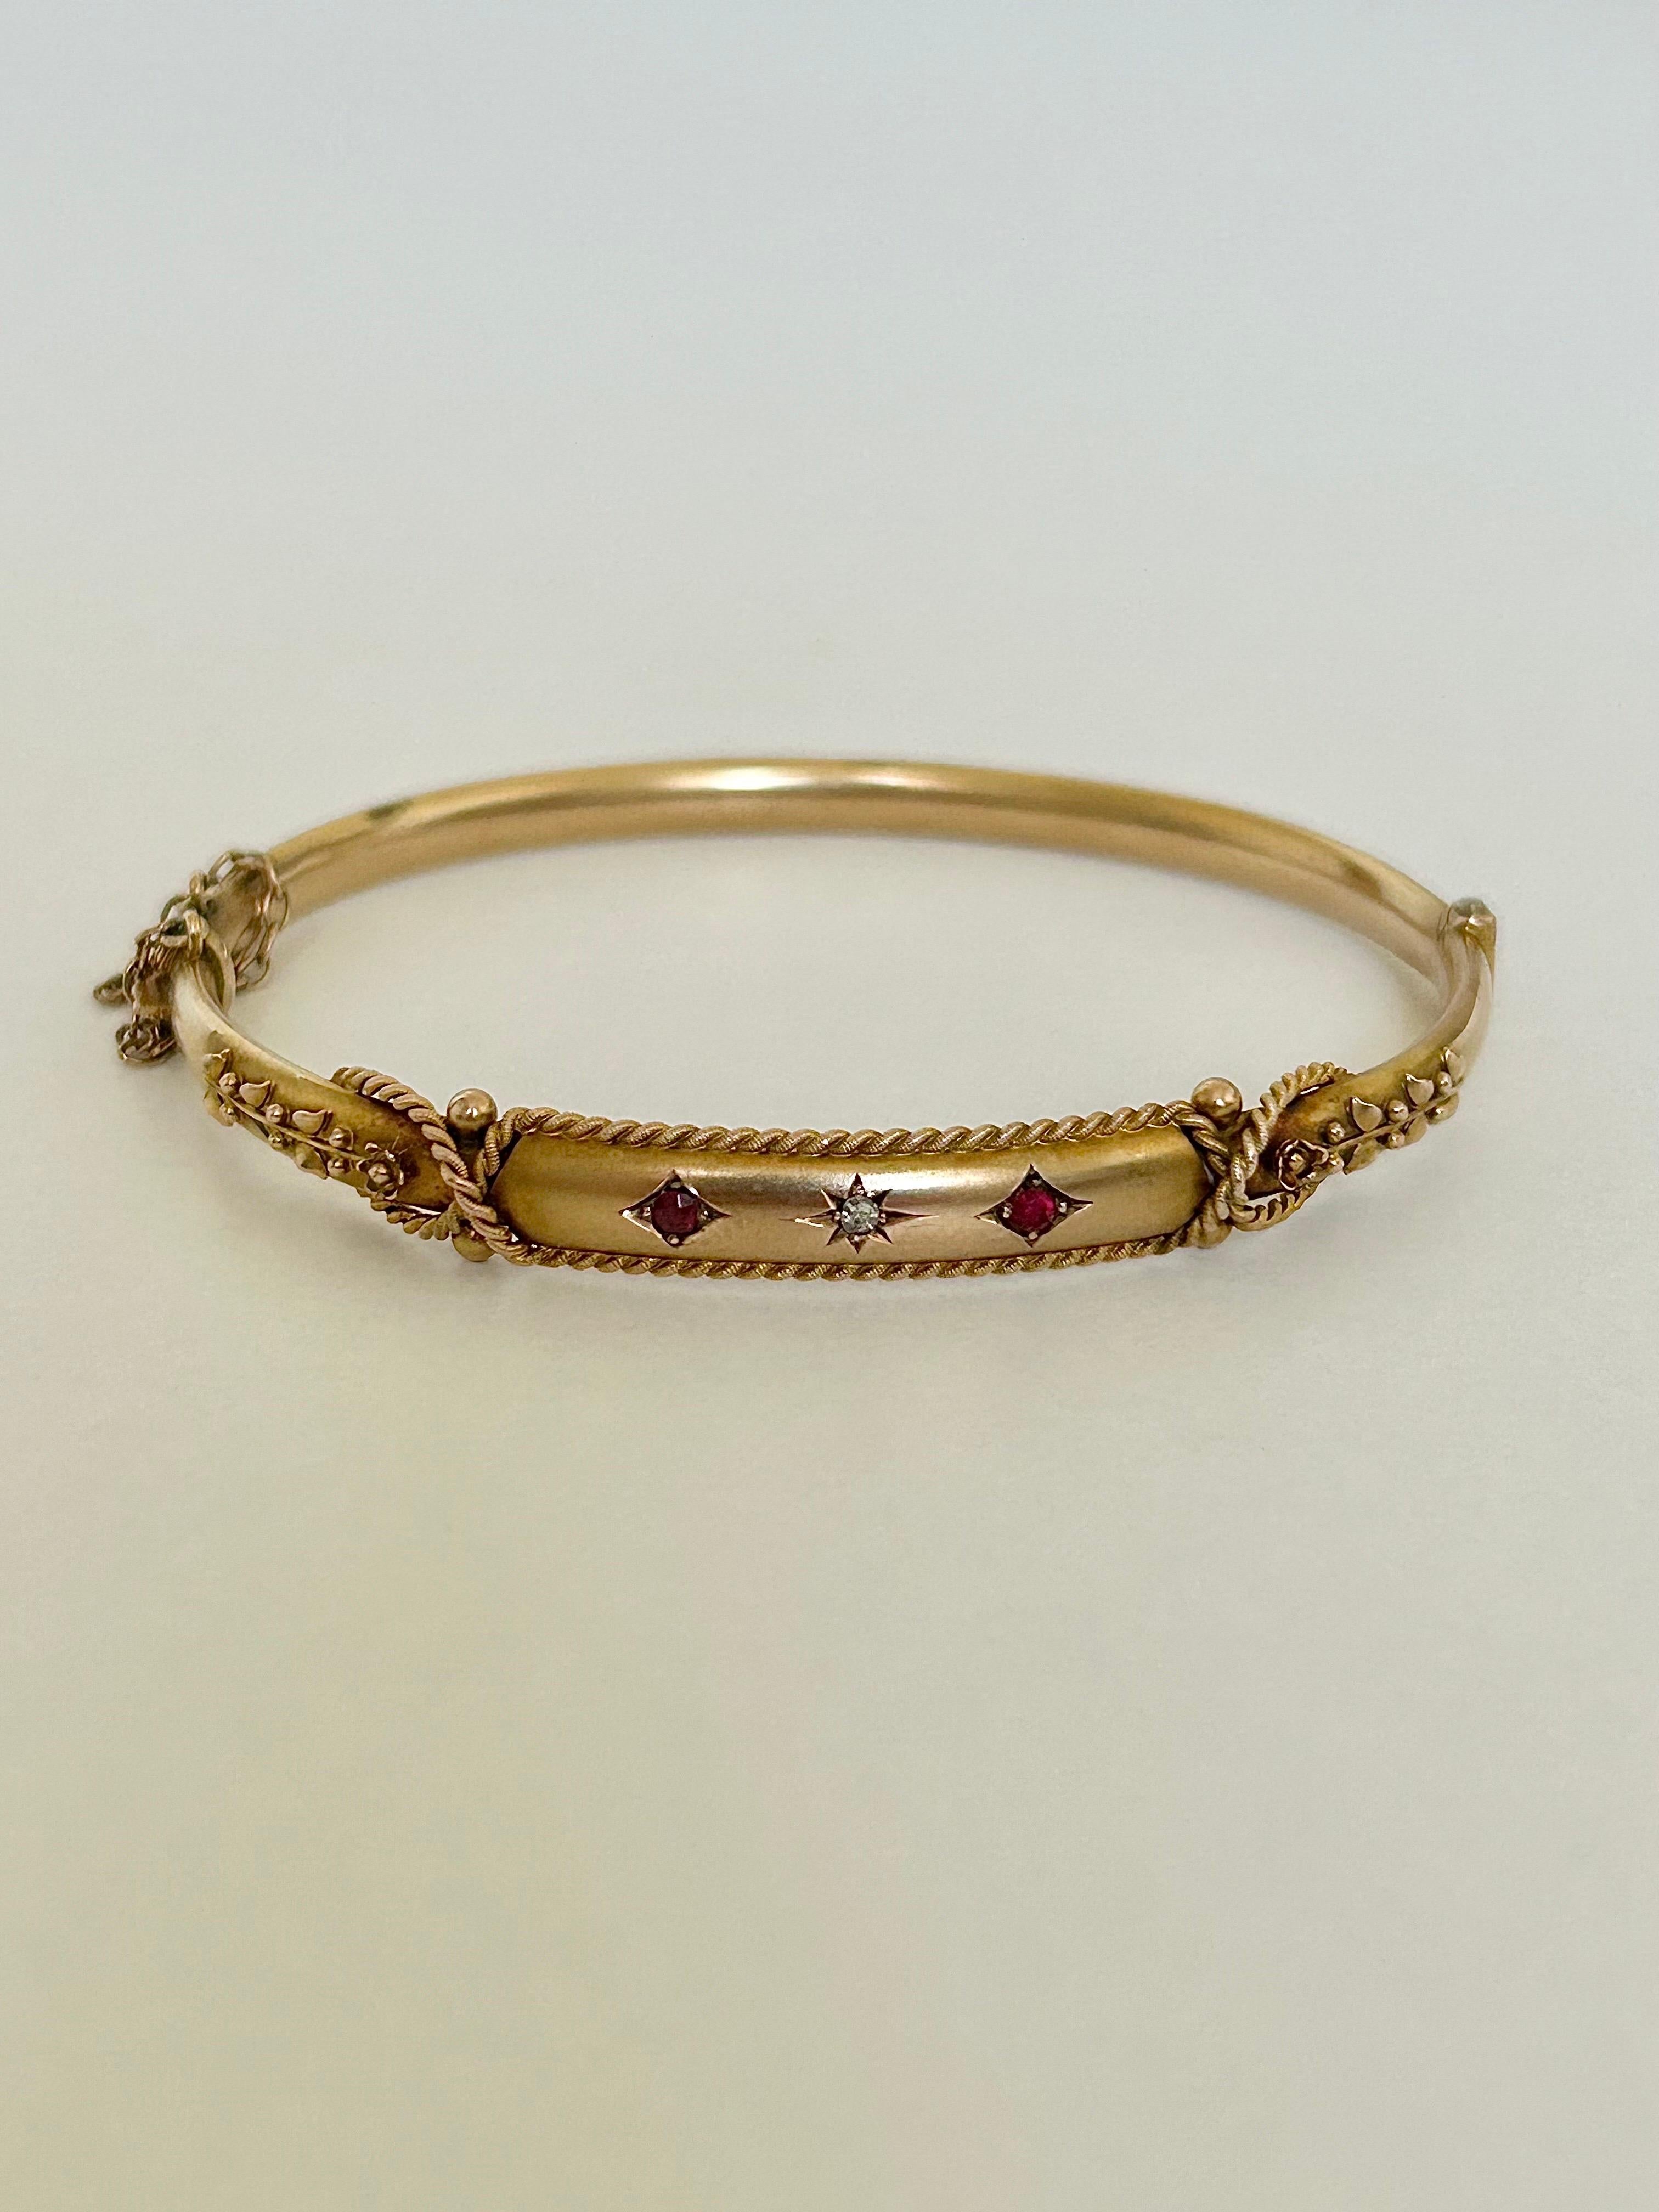 Antique Victorian 9 Carat Yellow Gold Ruby and Diamond Bangle Bracelet in Box In Good Condition For Sale In Chipping Campden, GB